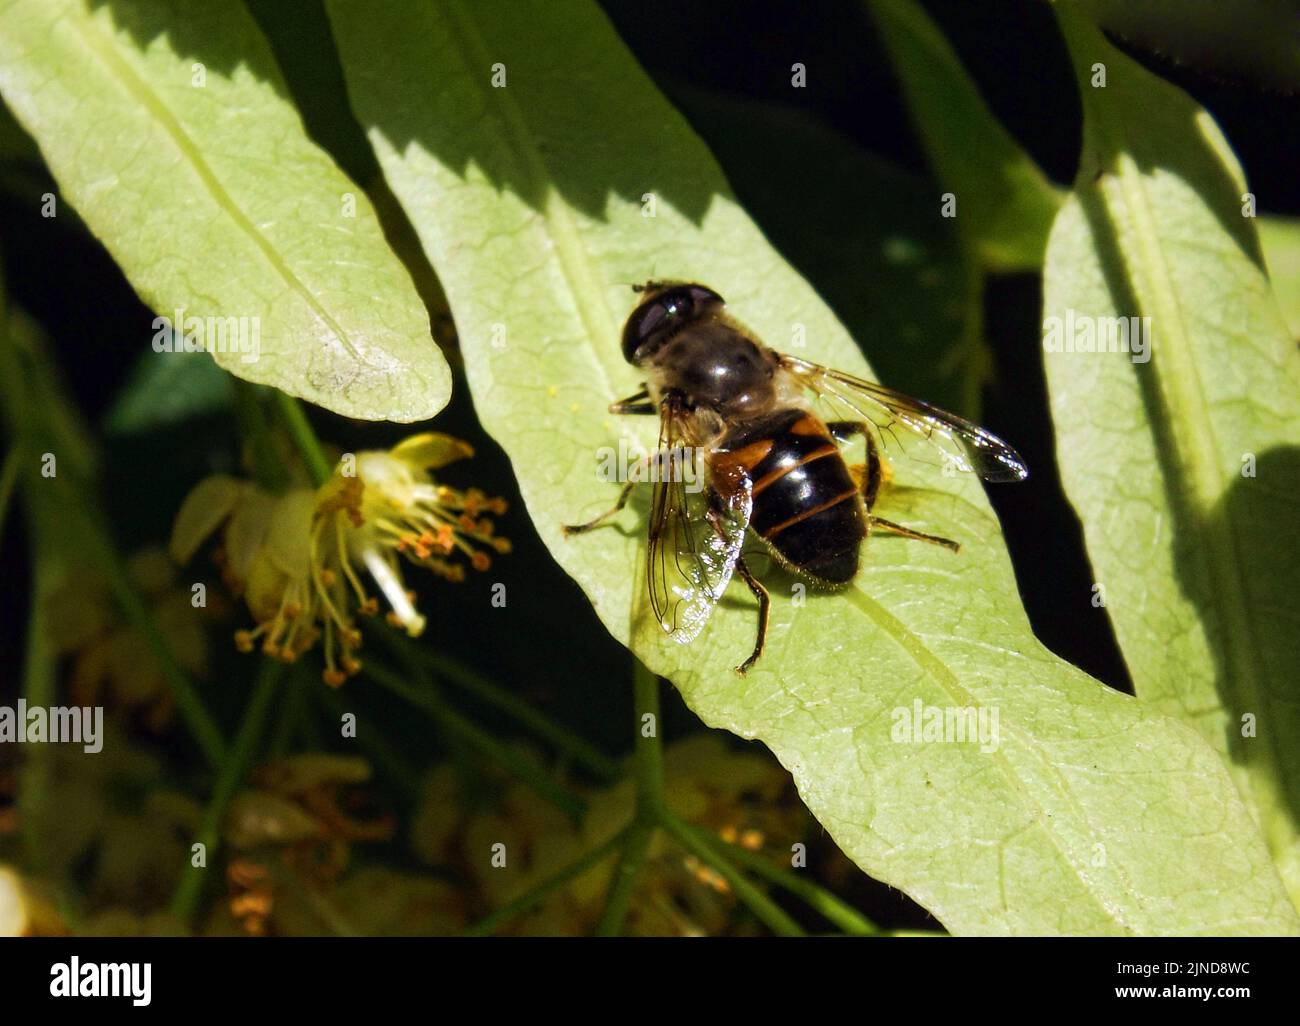 A honey bee is standing on a leaf of a linden tree. A honey bee on a sunlit leaf of a linden tree. Stock Photo